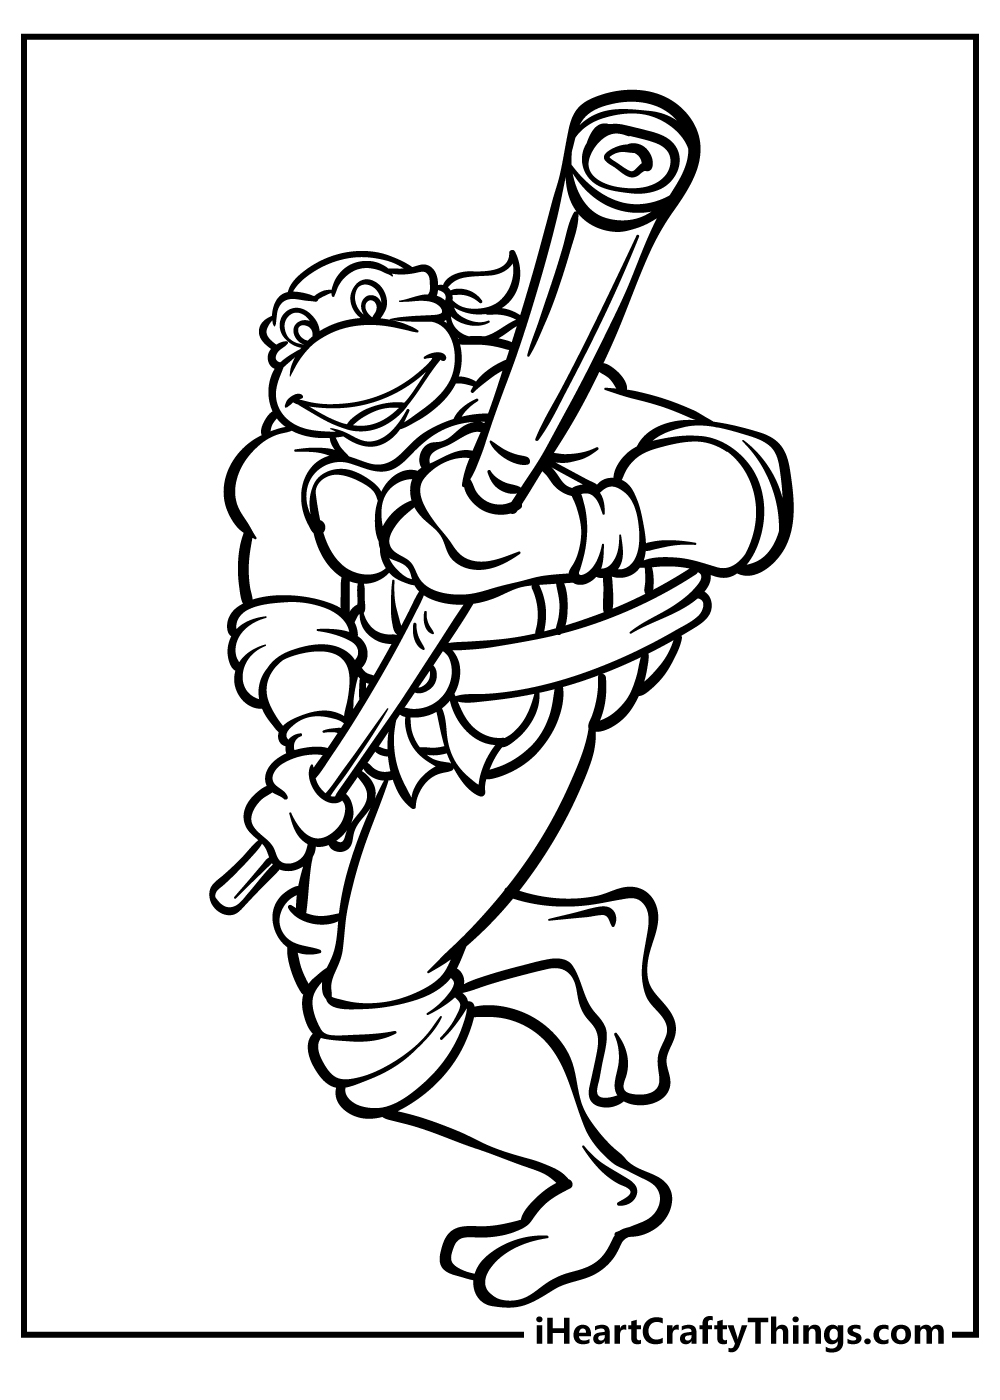 Ninja Turtles Coloring Pages for adults free printable